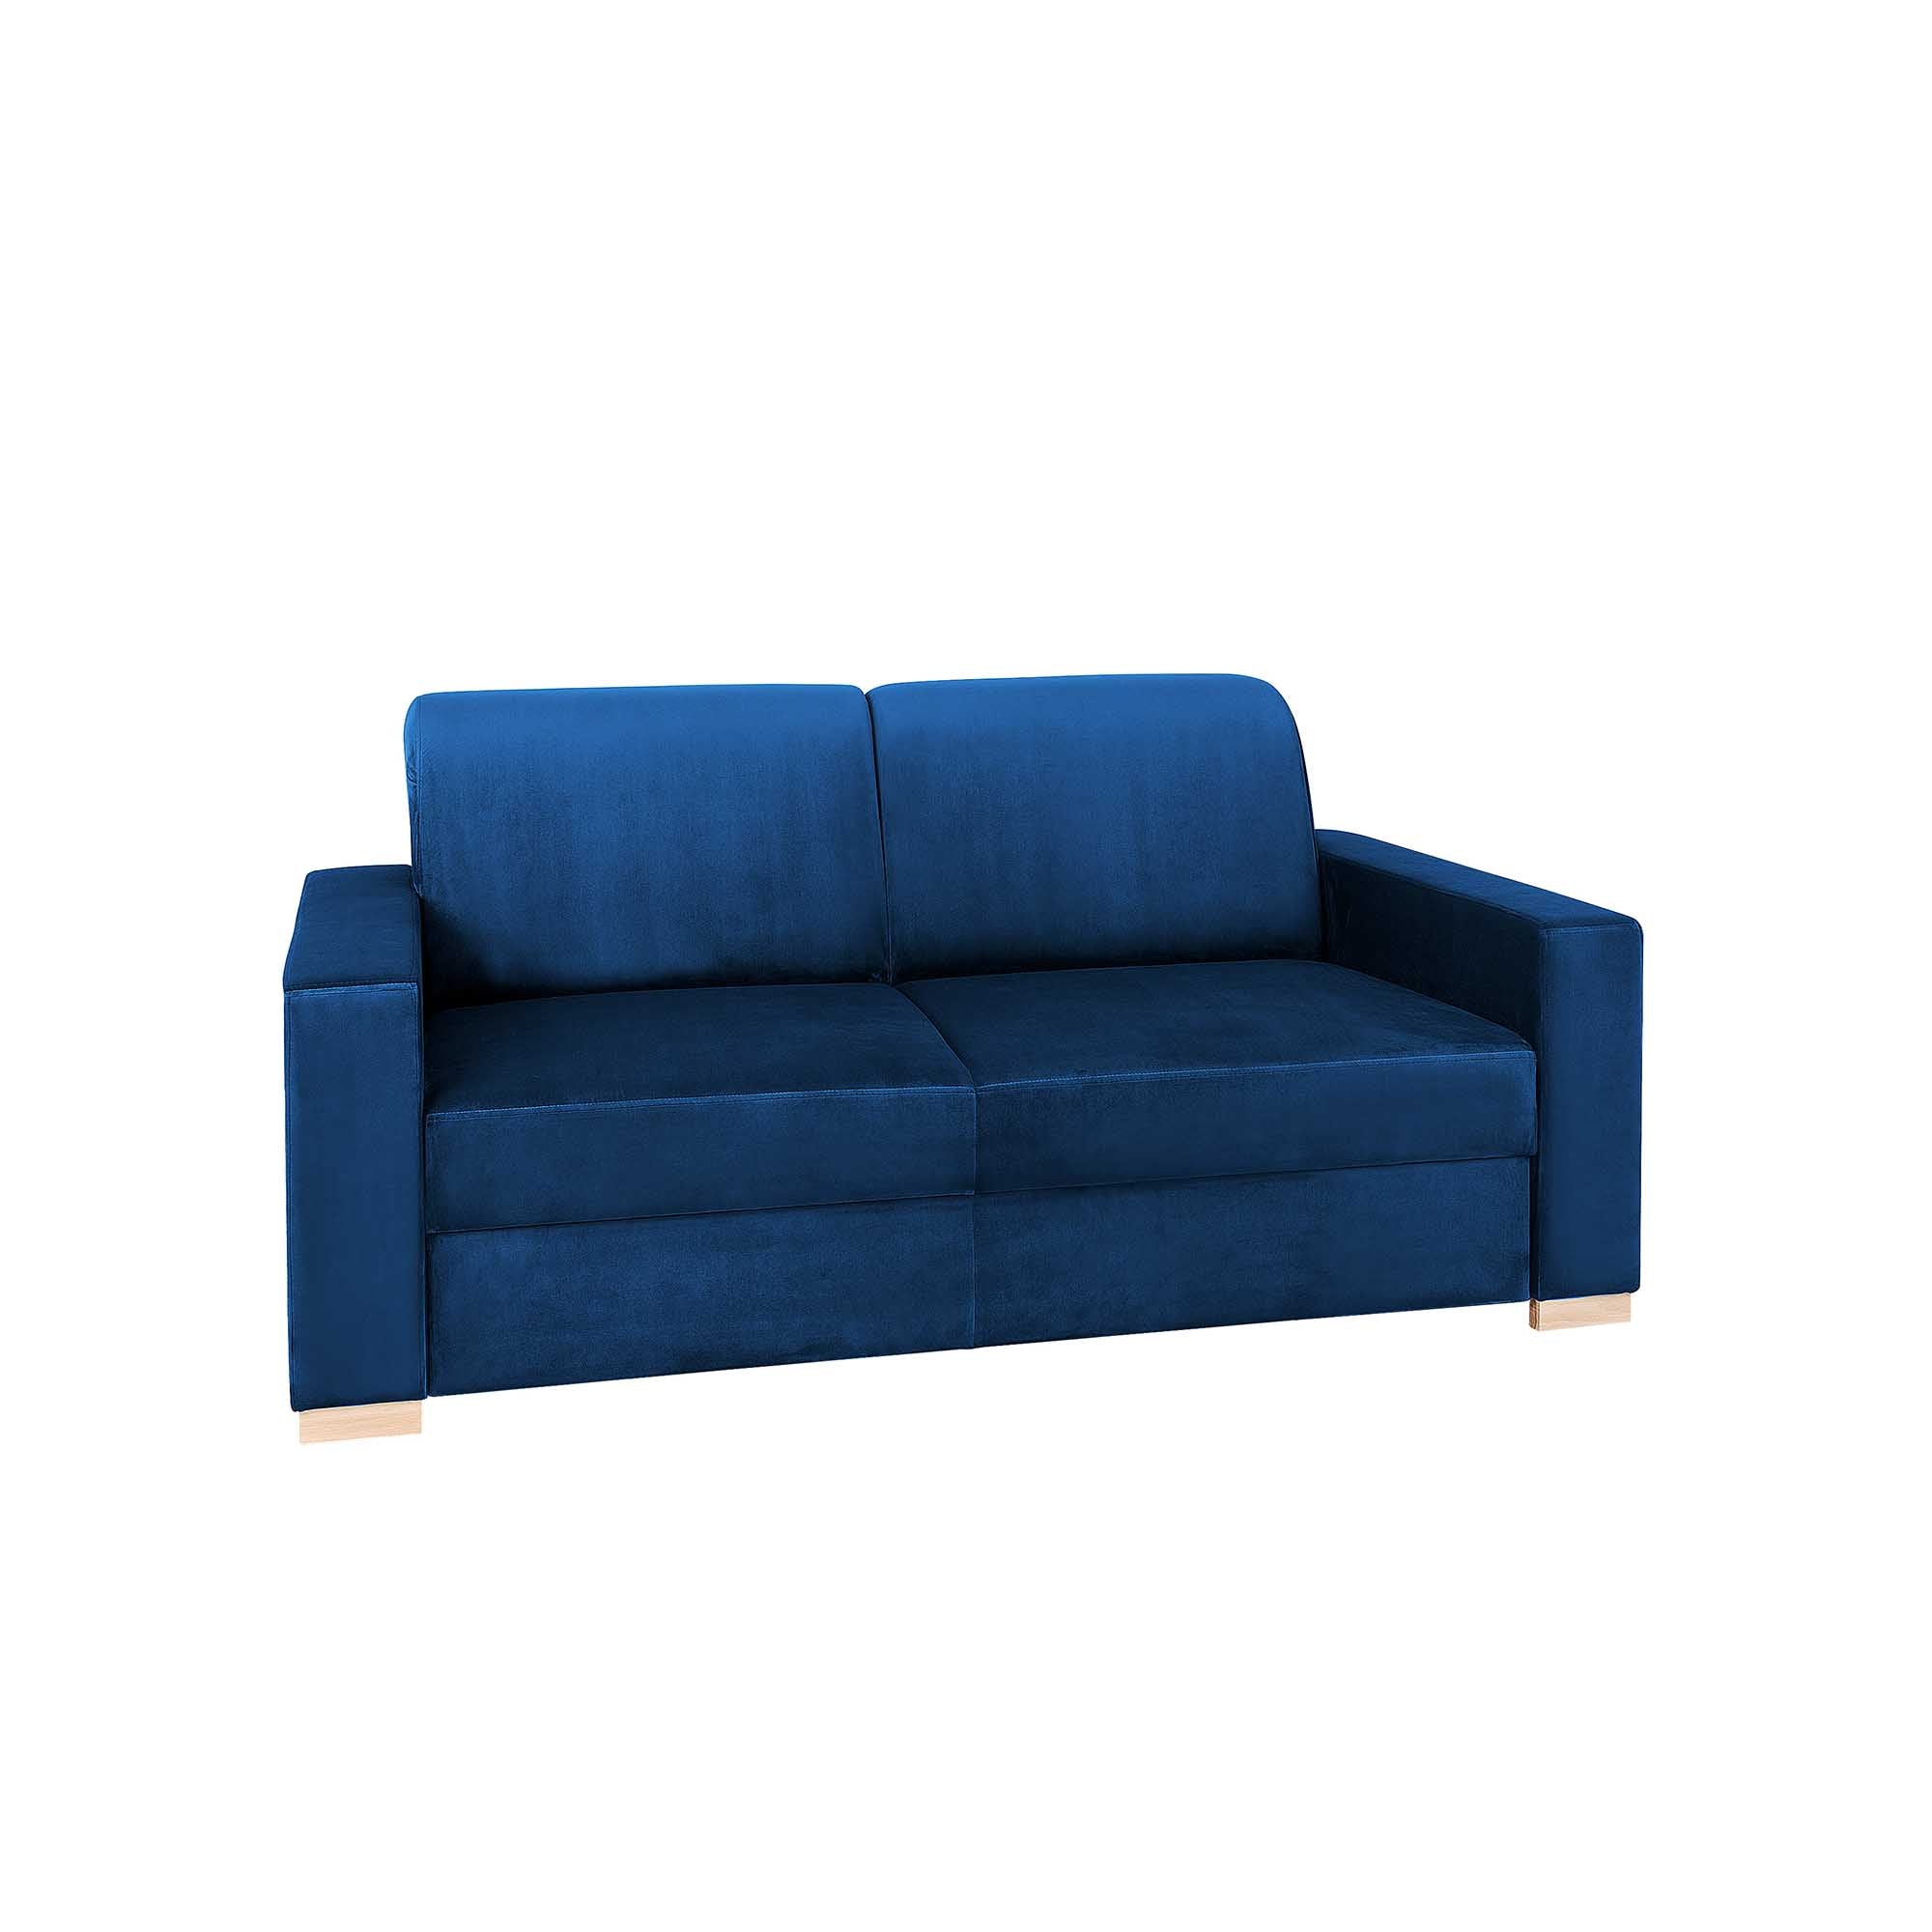 STABLE Sofa 2 Seaters upholstery colour blue